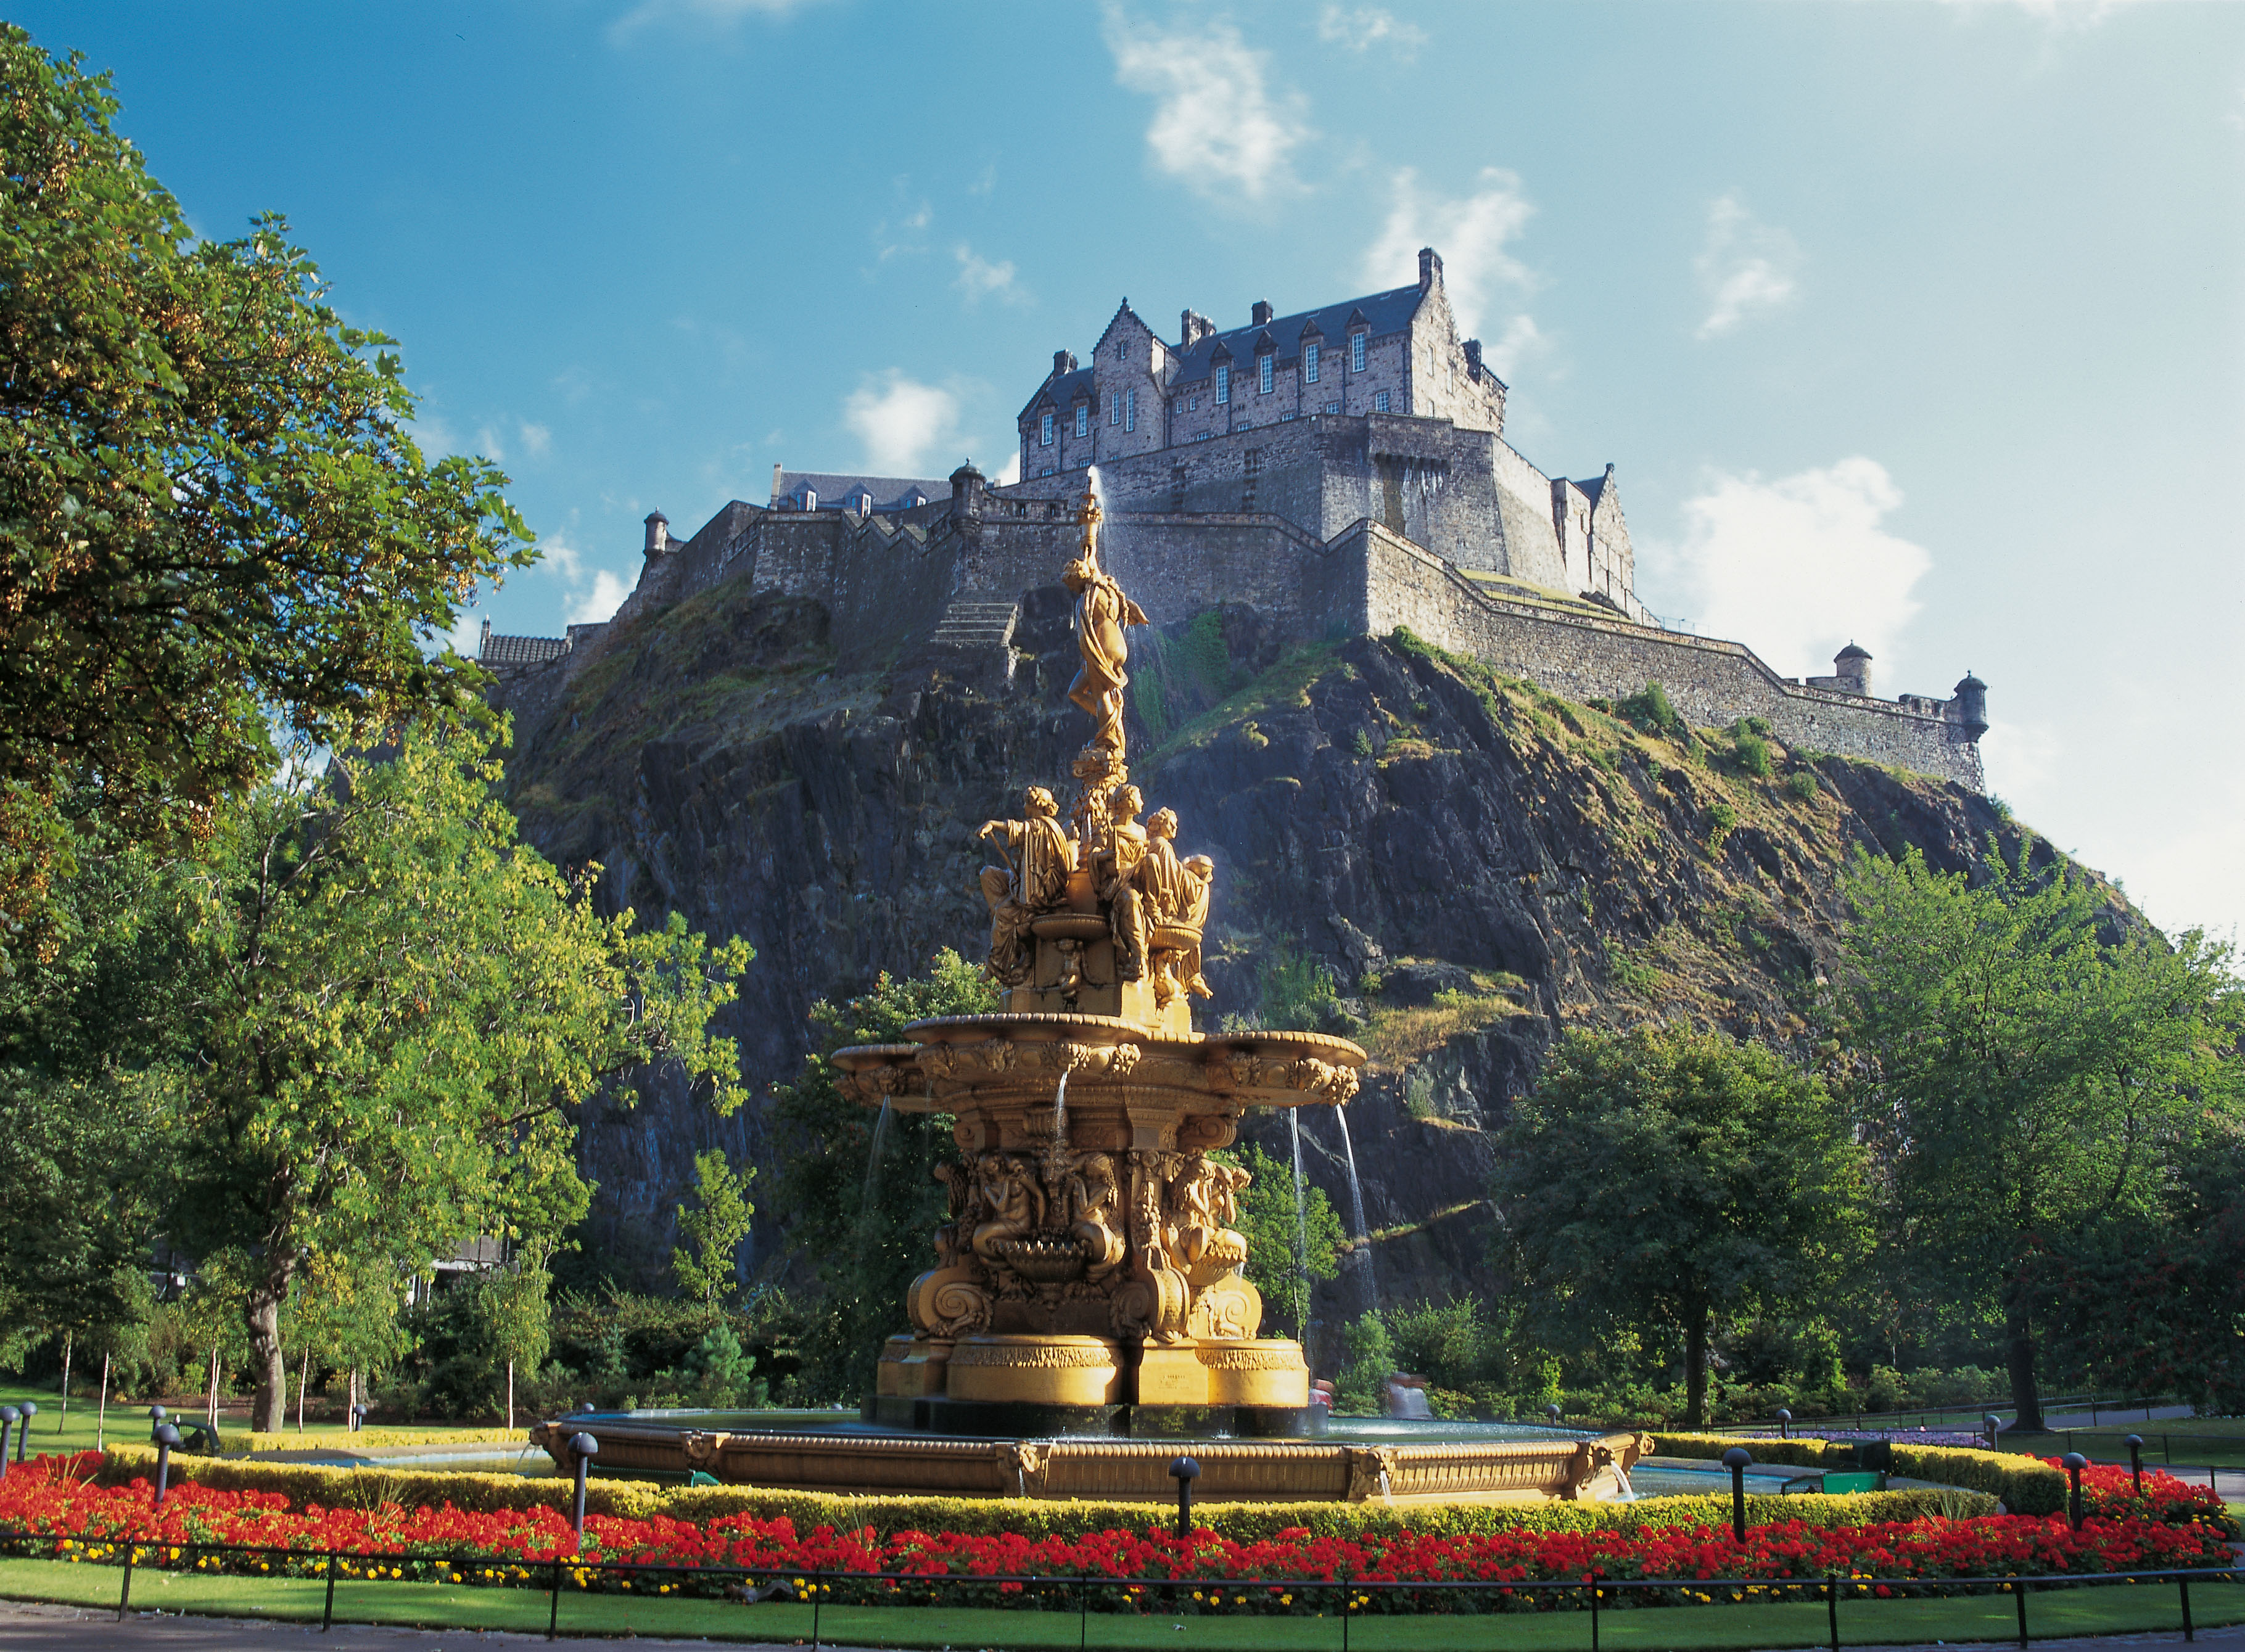 Photograph of Edinburgh Castle taken from Princes Street Gardens with an ornate golden water fountain in the foreground and blue sky and sunshine